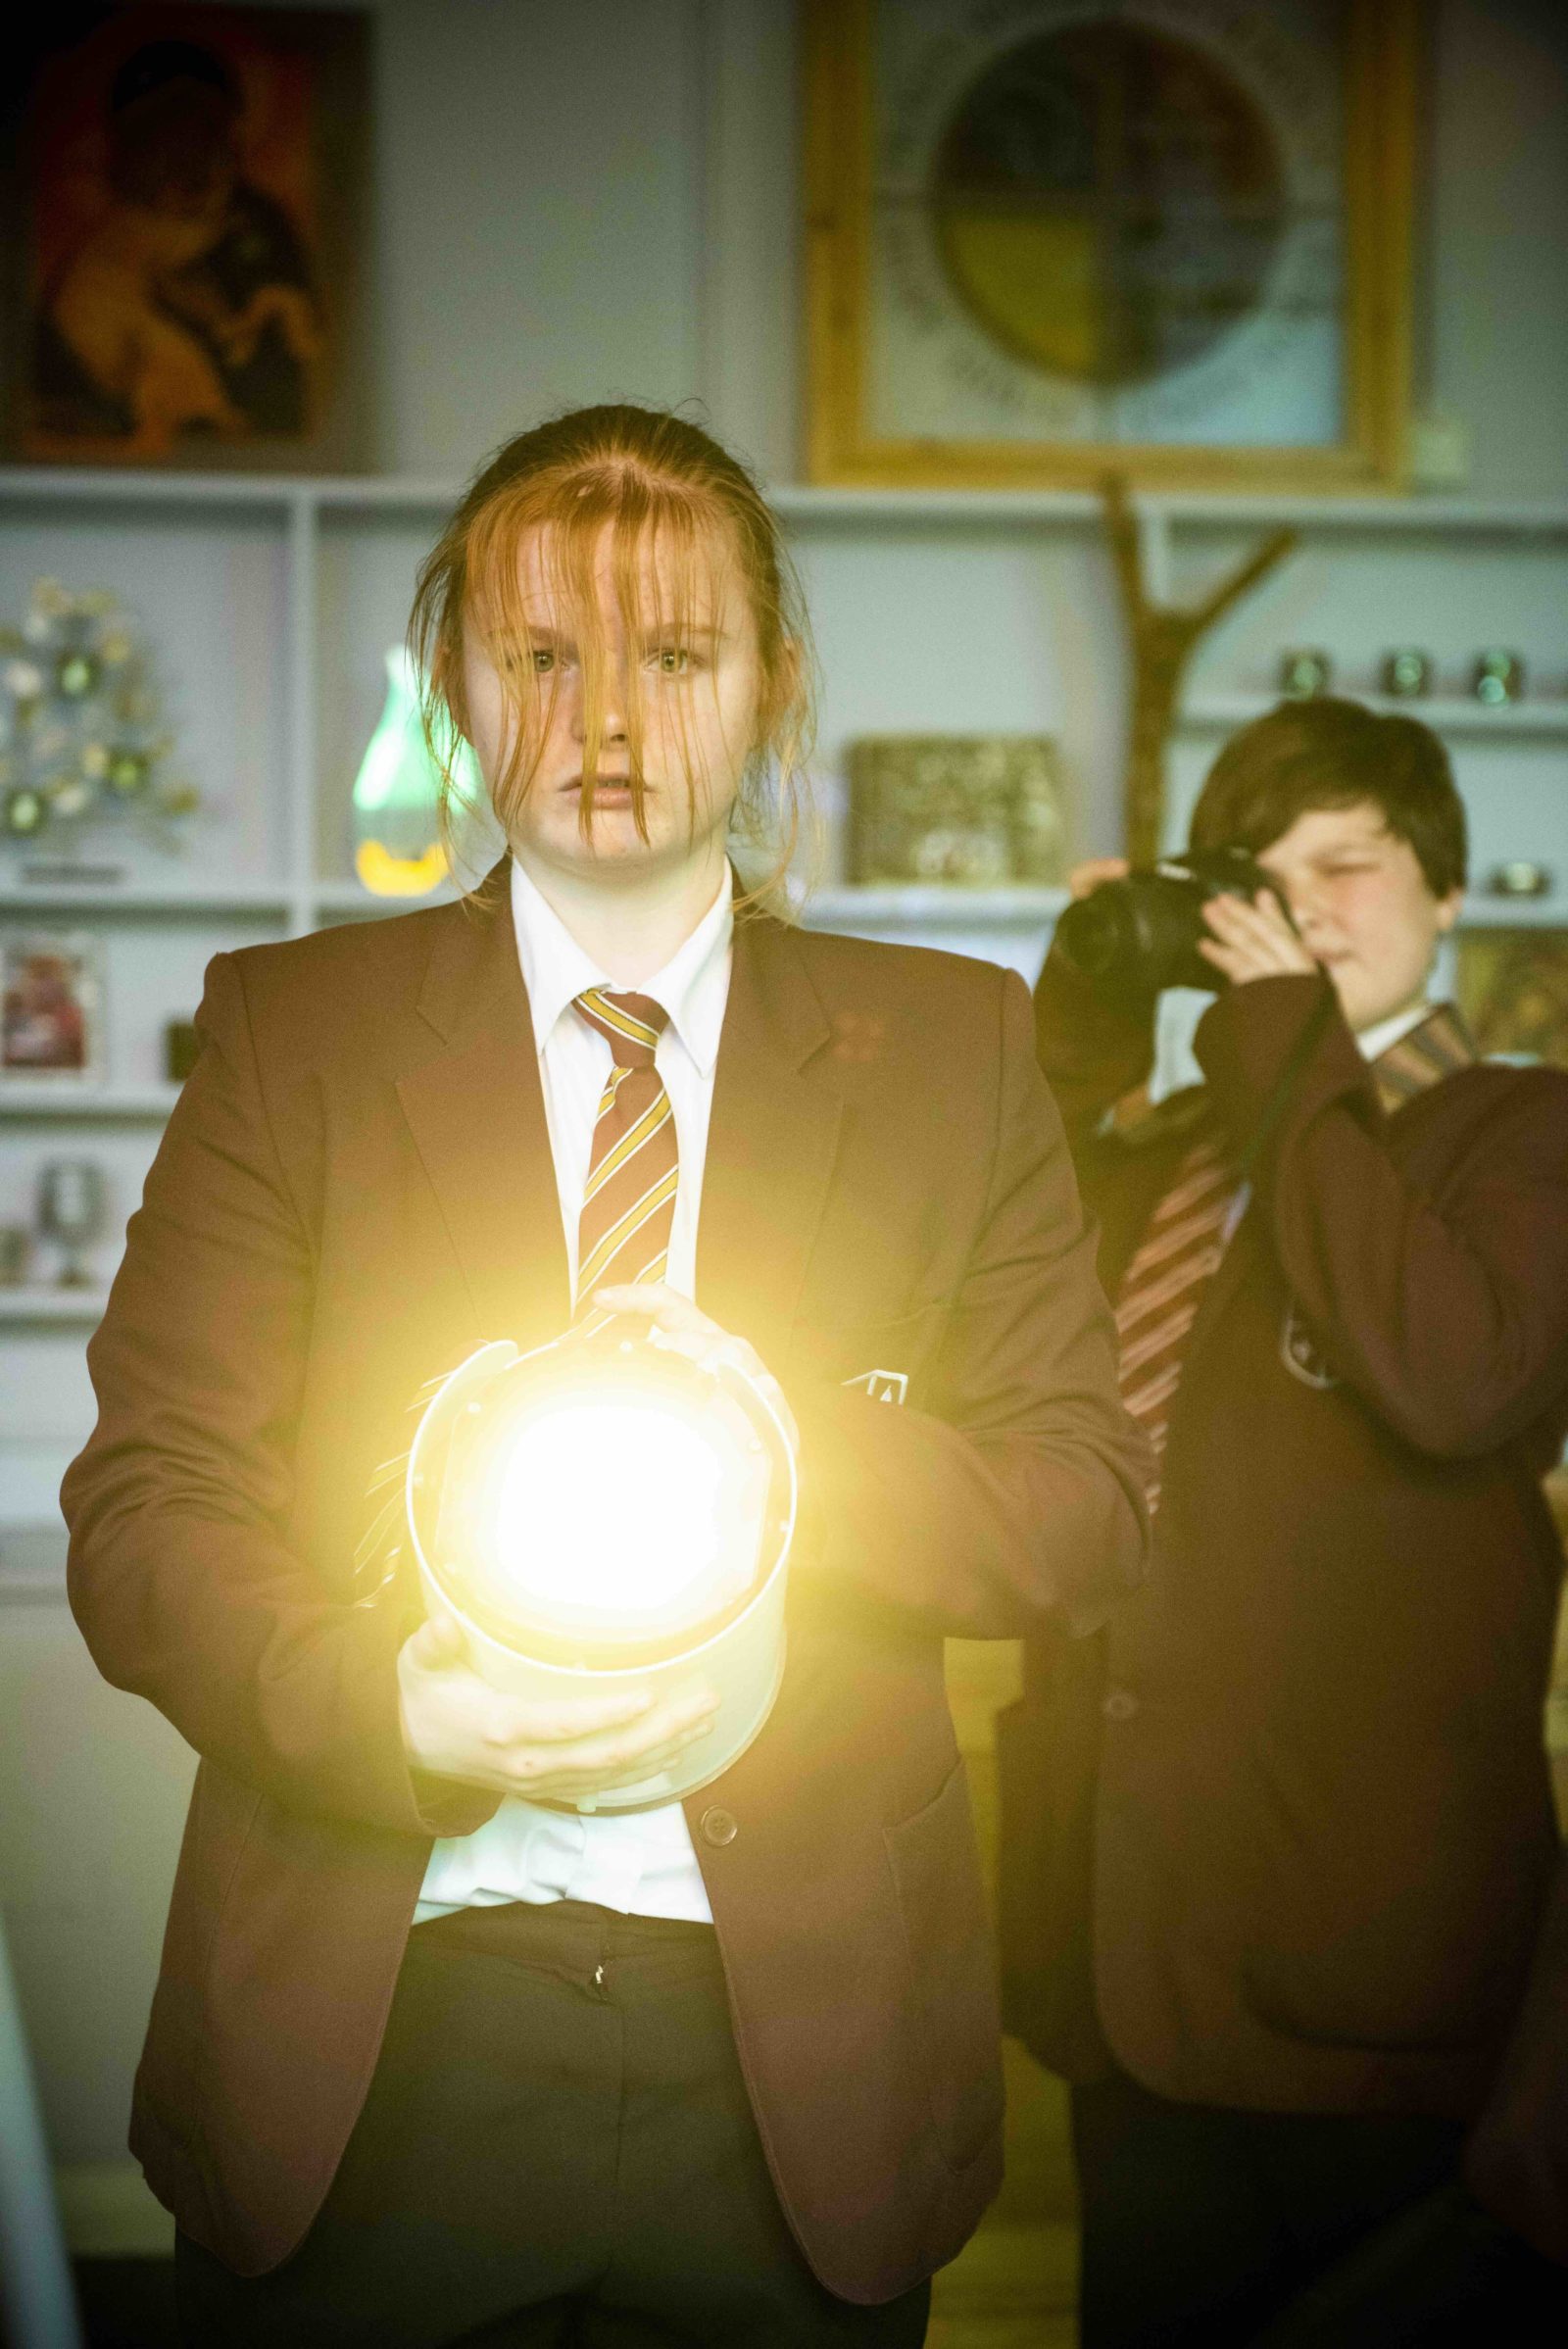 A young person in a school uniform is facing the camera, holding a large spotlight and shining towards us. They have long red hair which falls over their eyes and serious look on their face. Behind them another young person in a school uniform is holding up a camera and taking a picture.